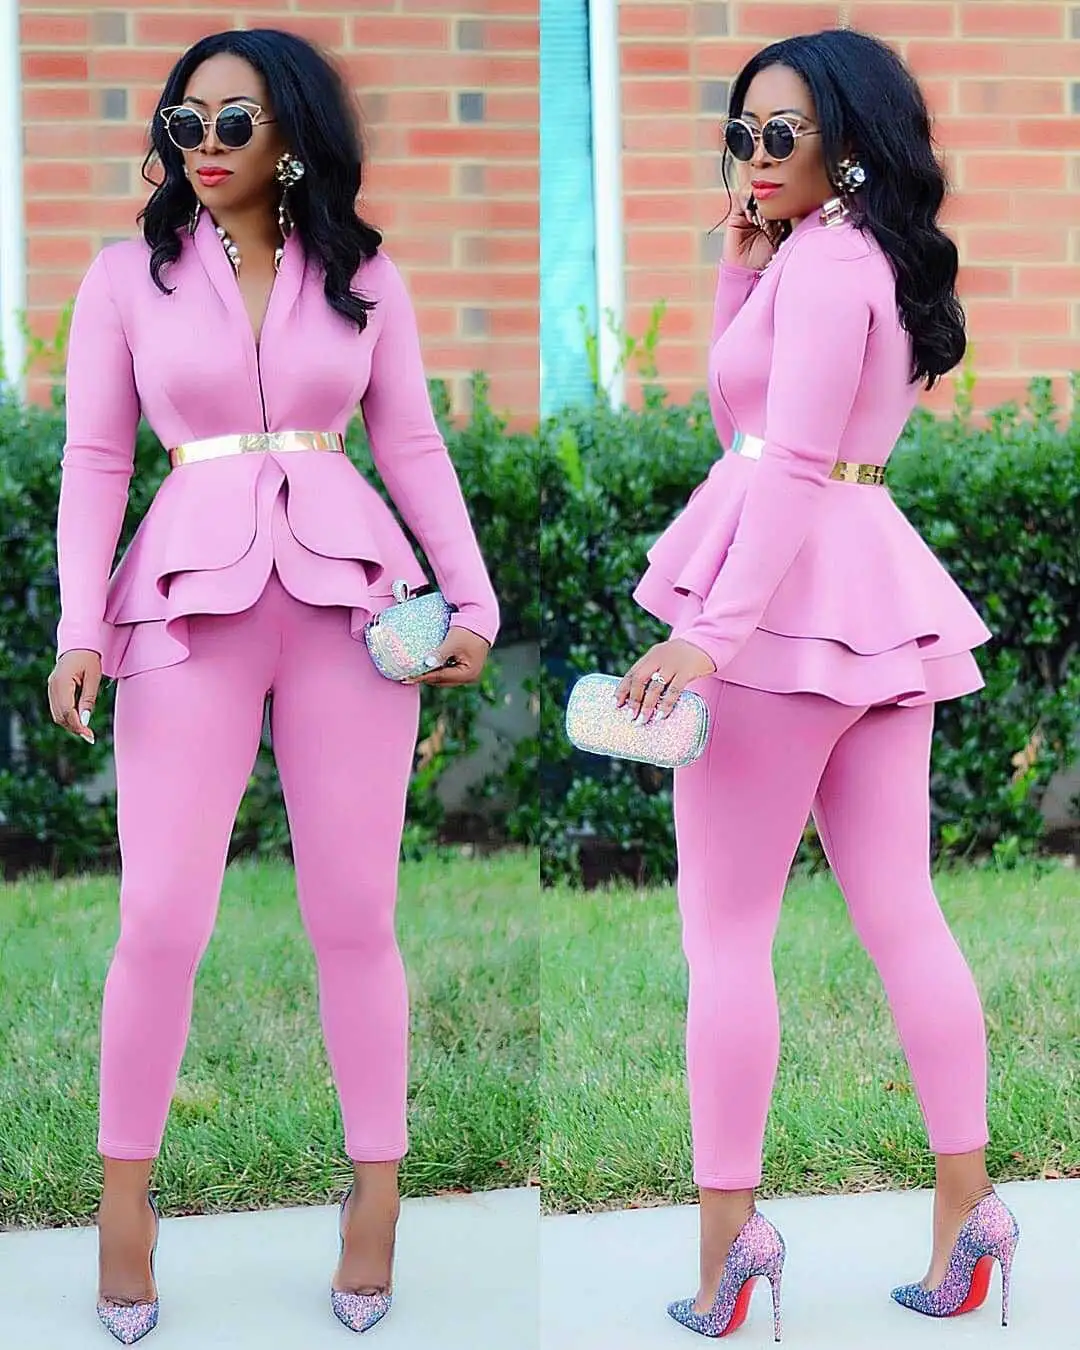 2021 New Fashion Ruffle Casual Long Sleeves Female Pink Women's Blazers Slim Fit Uniform Two Piece Jacket And Pant Set